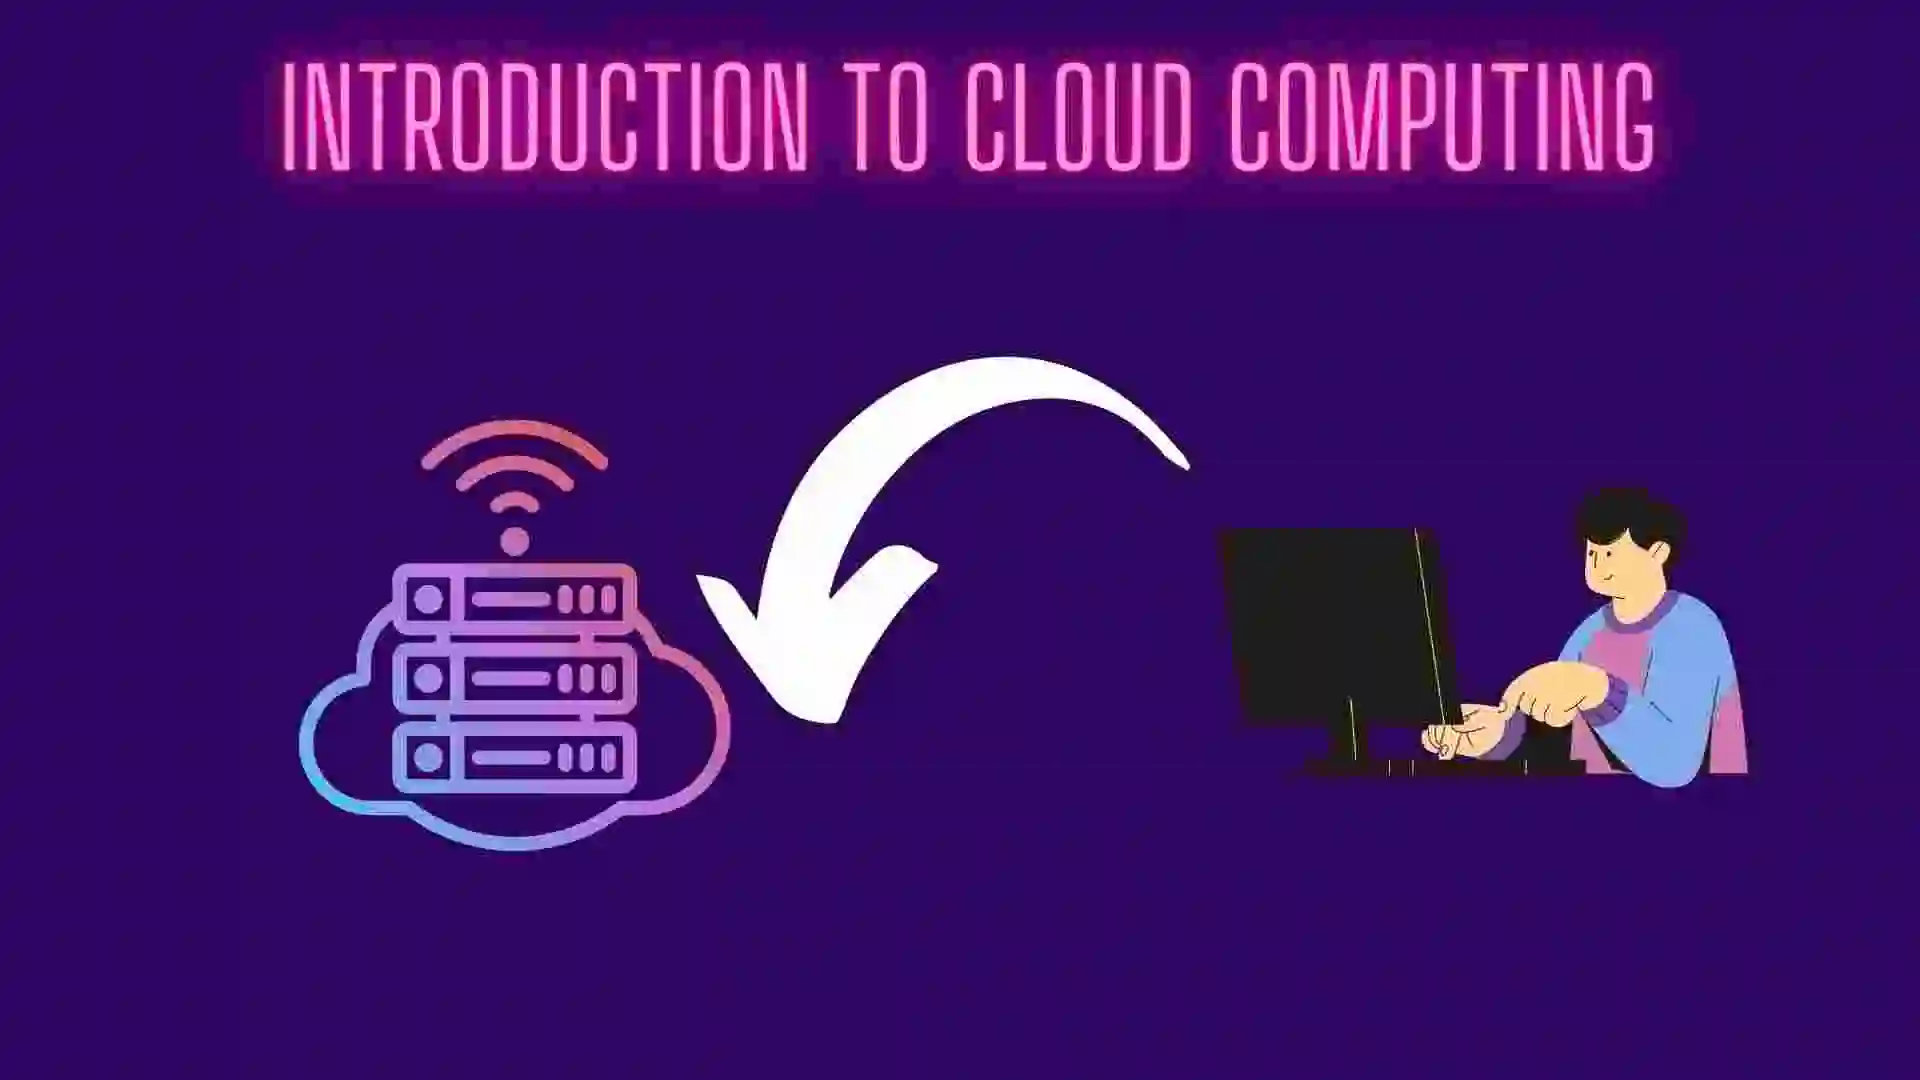 Cloud computing allows users to access computing resources and services over the Internet instead of using their own hardware and software.